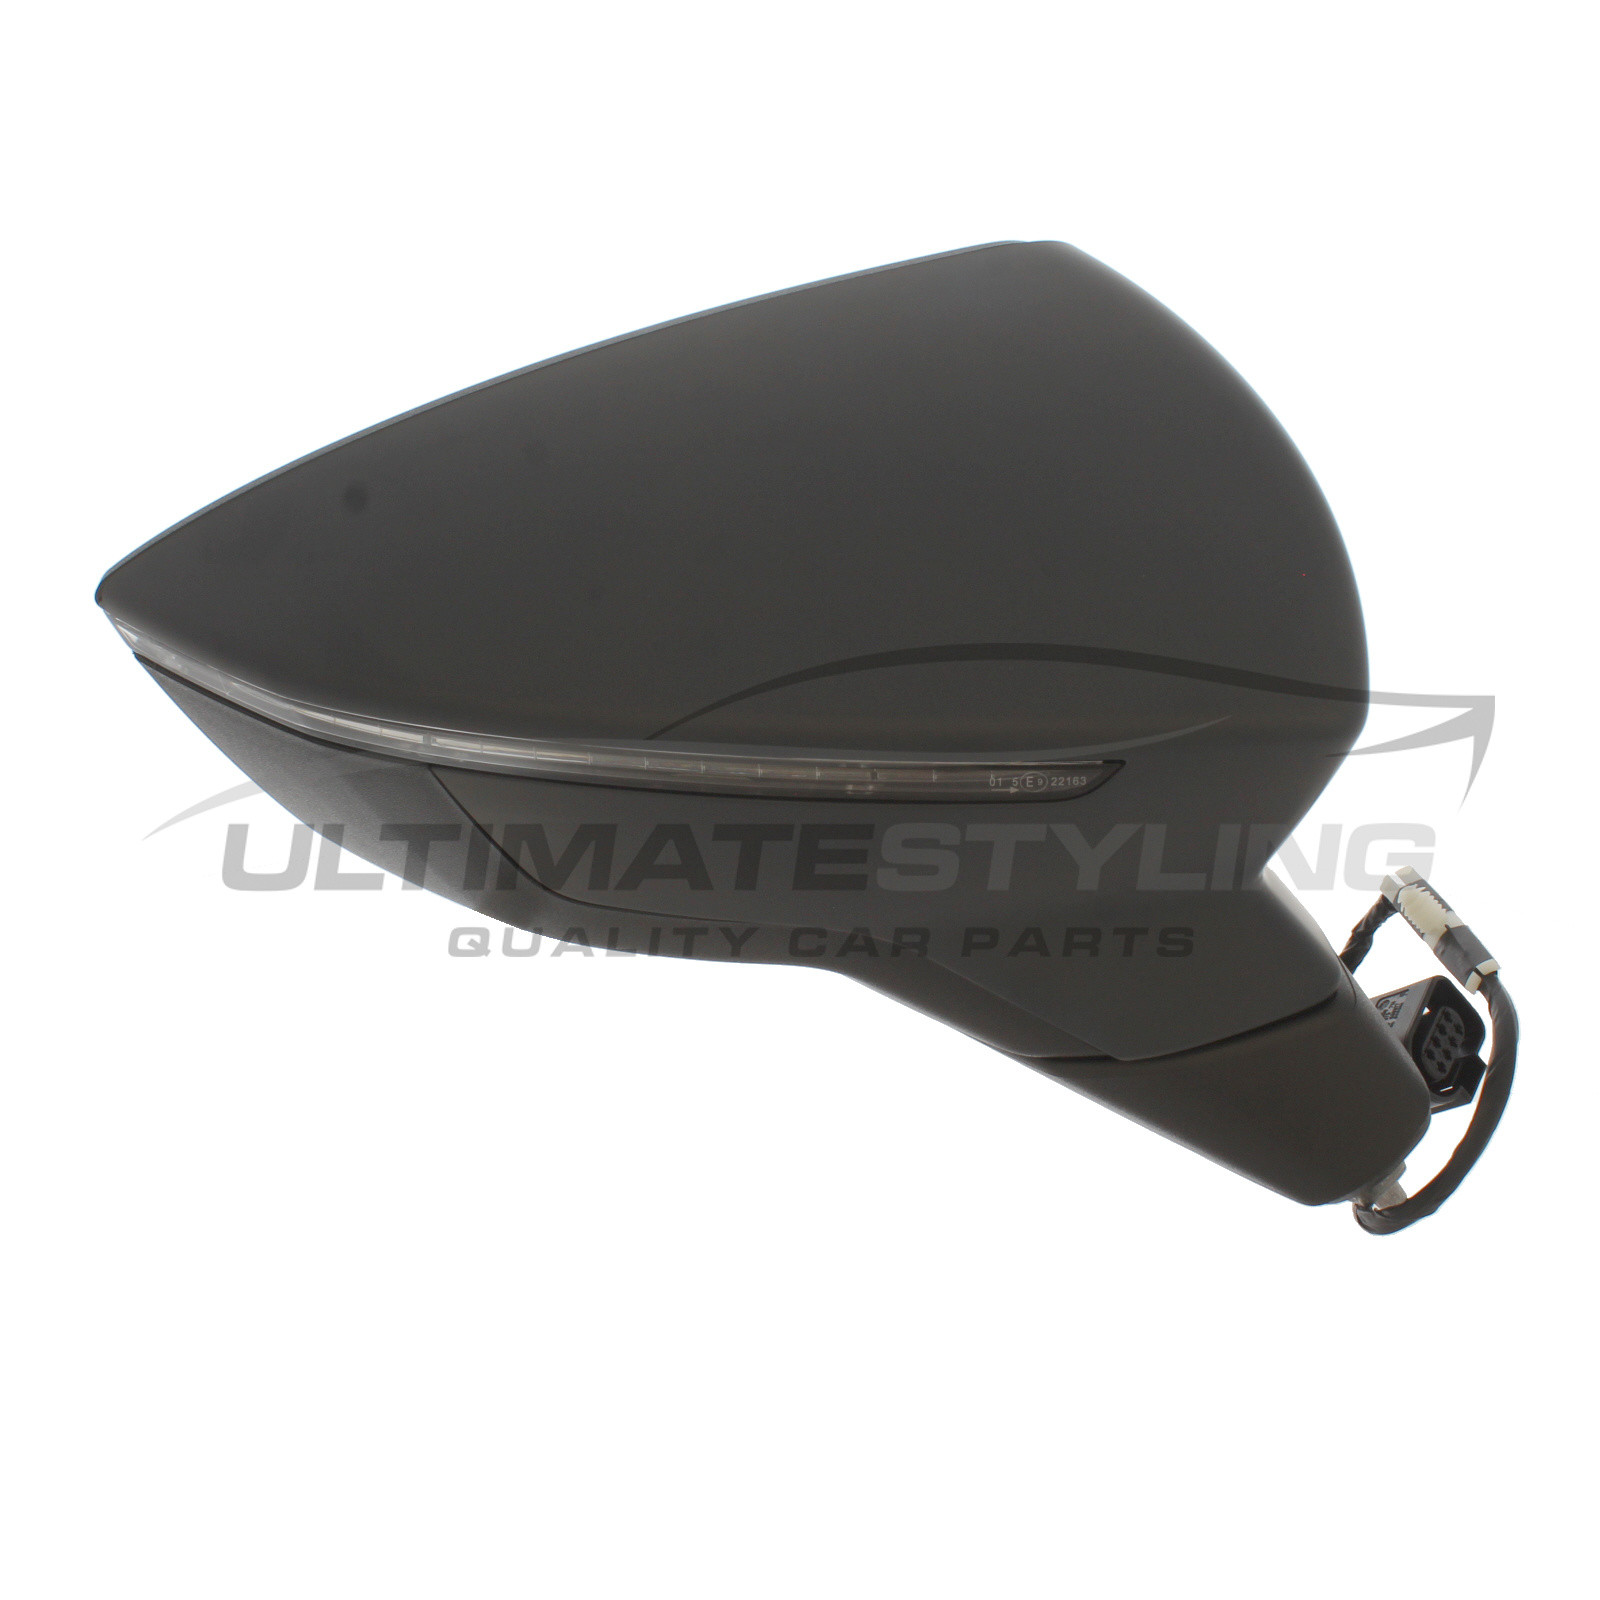 Seat Leon Wing Mirror / Door Mirror - Drivers Side (RH) - Electric adjustment - Heated Glass - Indicator - Primed